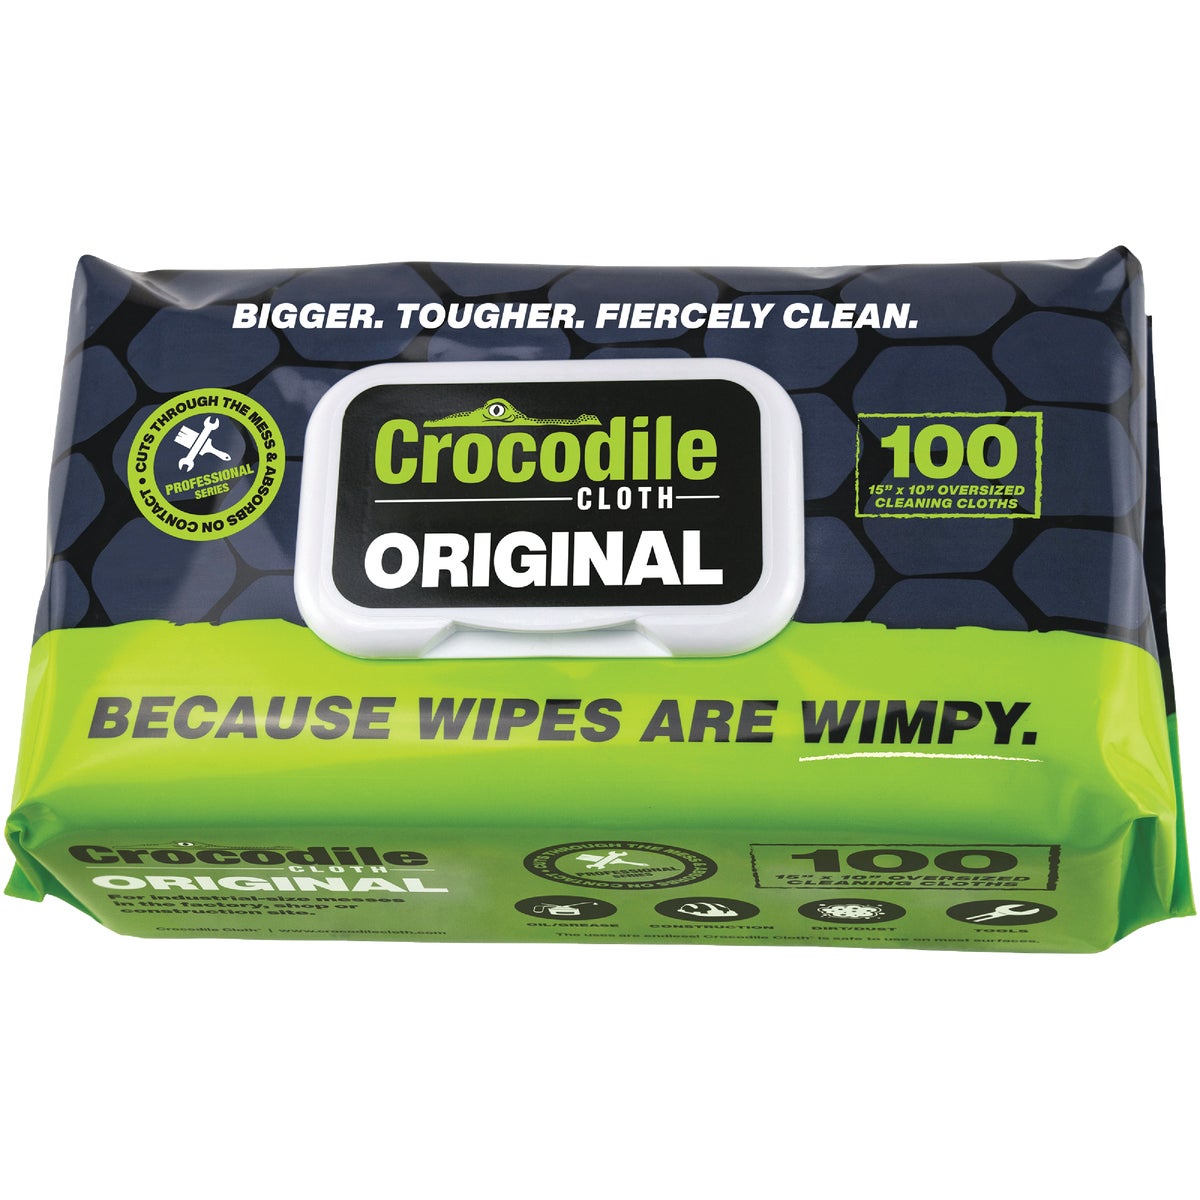 Crocodile Cloth Original Huge Cleaning Cloth (100-Count)